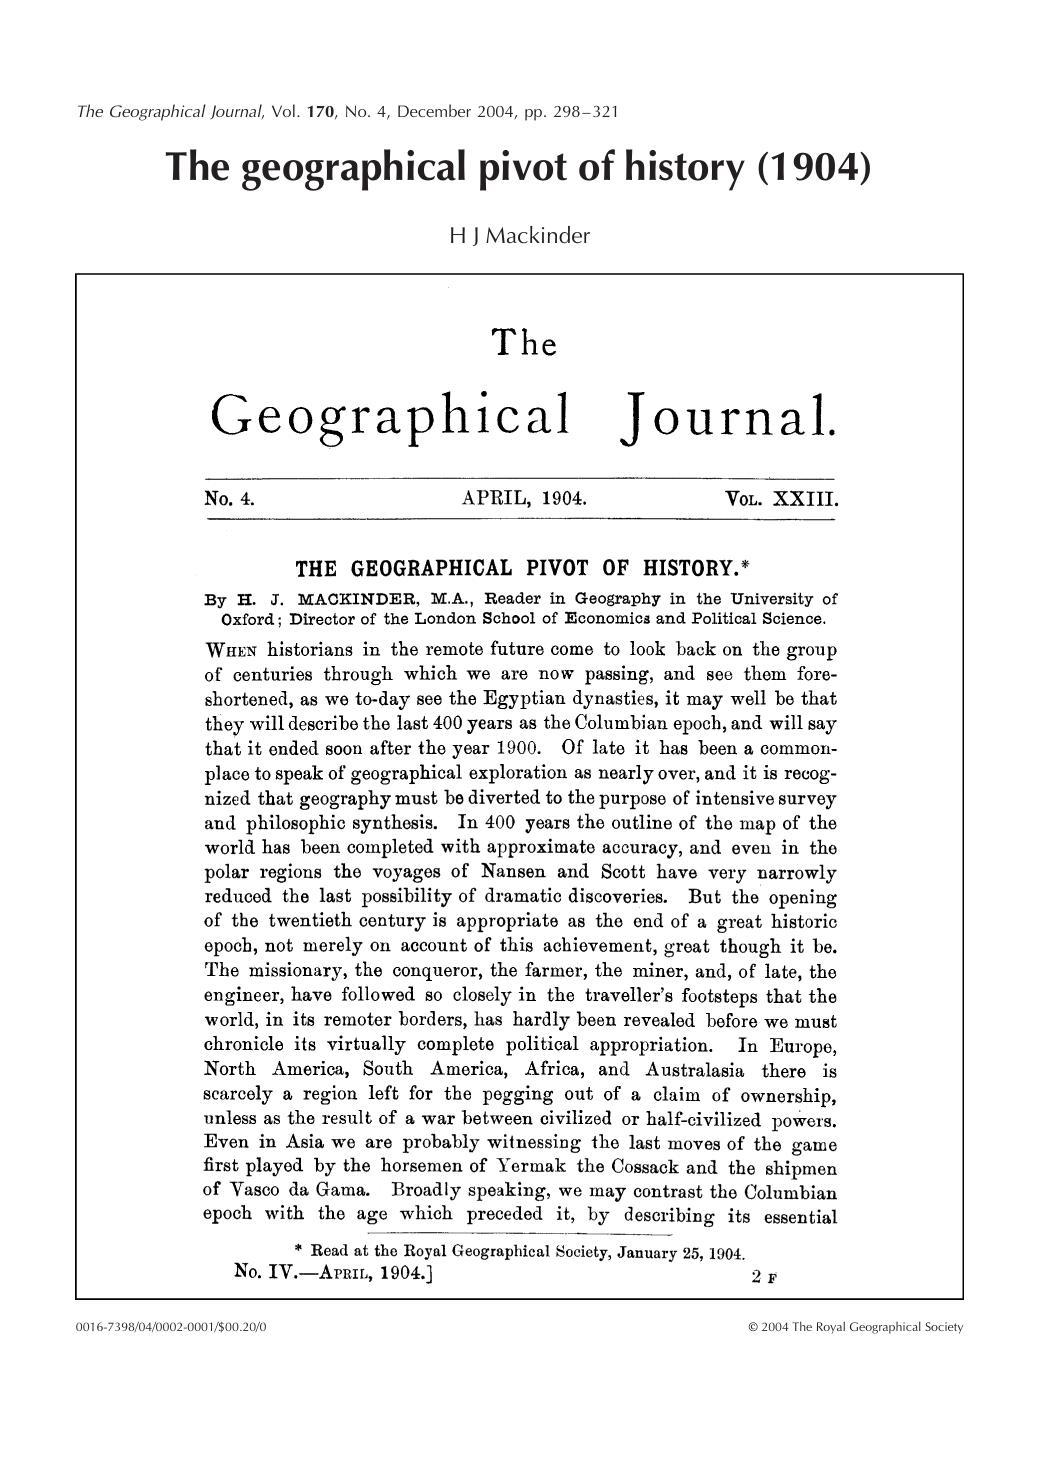 The Geographical Pivot Of History (1904) by Halford J. Mackinder